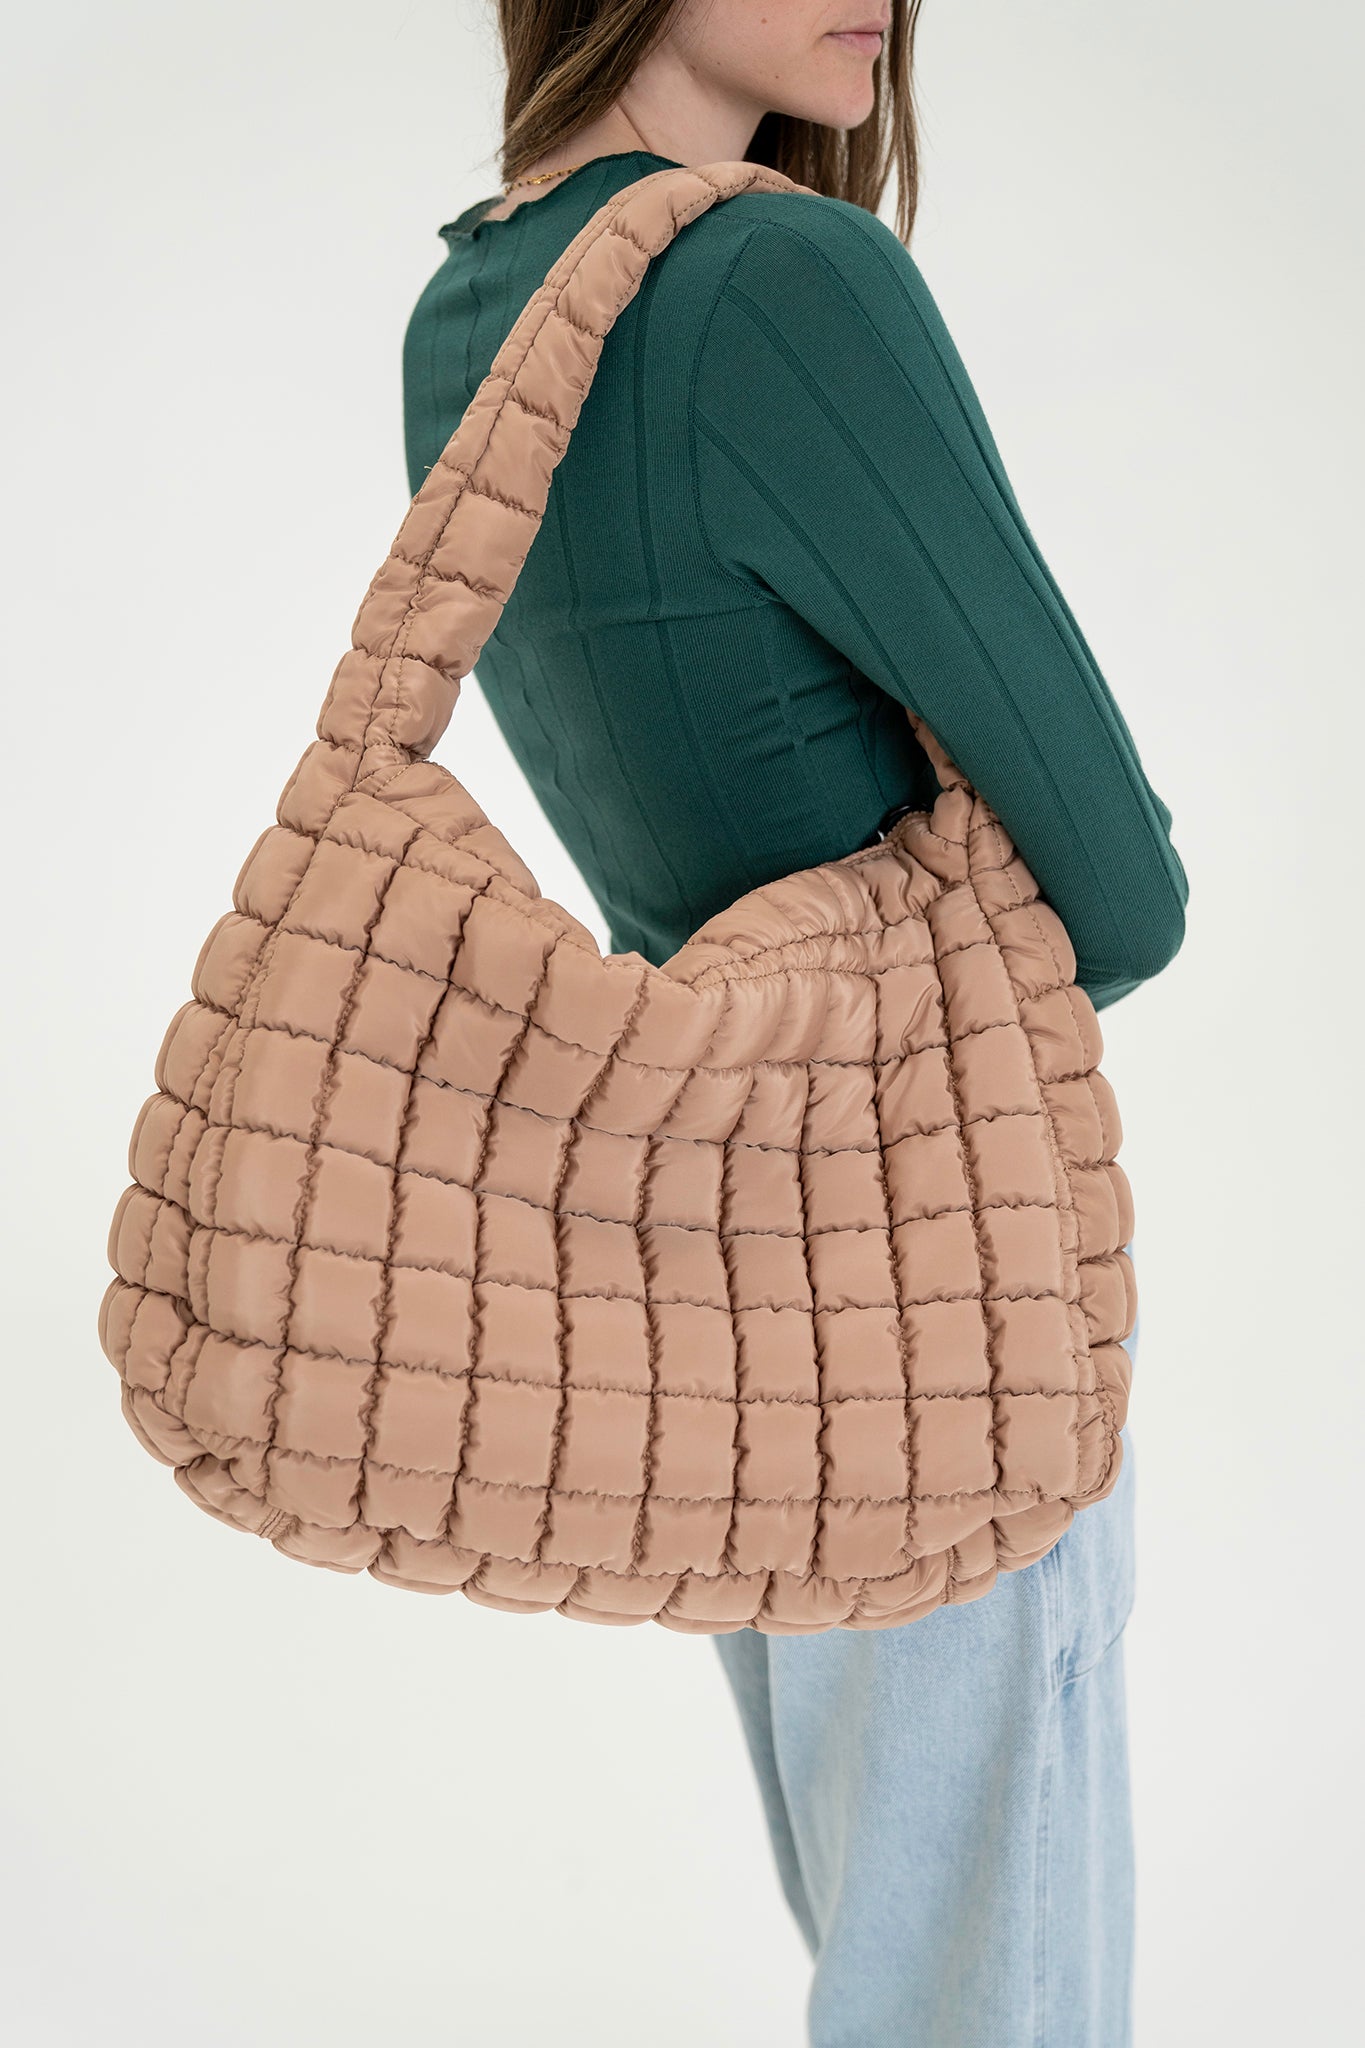 View 1 of Cleo Quilted Hobo Bag in Sand, a Bags from Larrea Cove. Detail: 
<div class="Flex-sc-14t19kd-0 Column-sc-4nf49i-0 A...